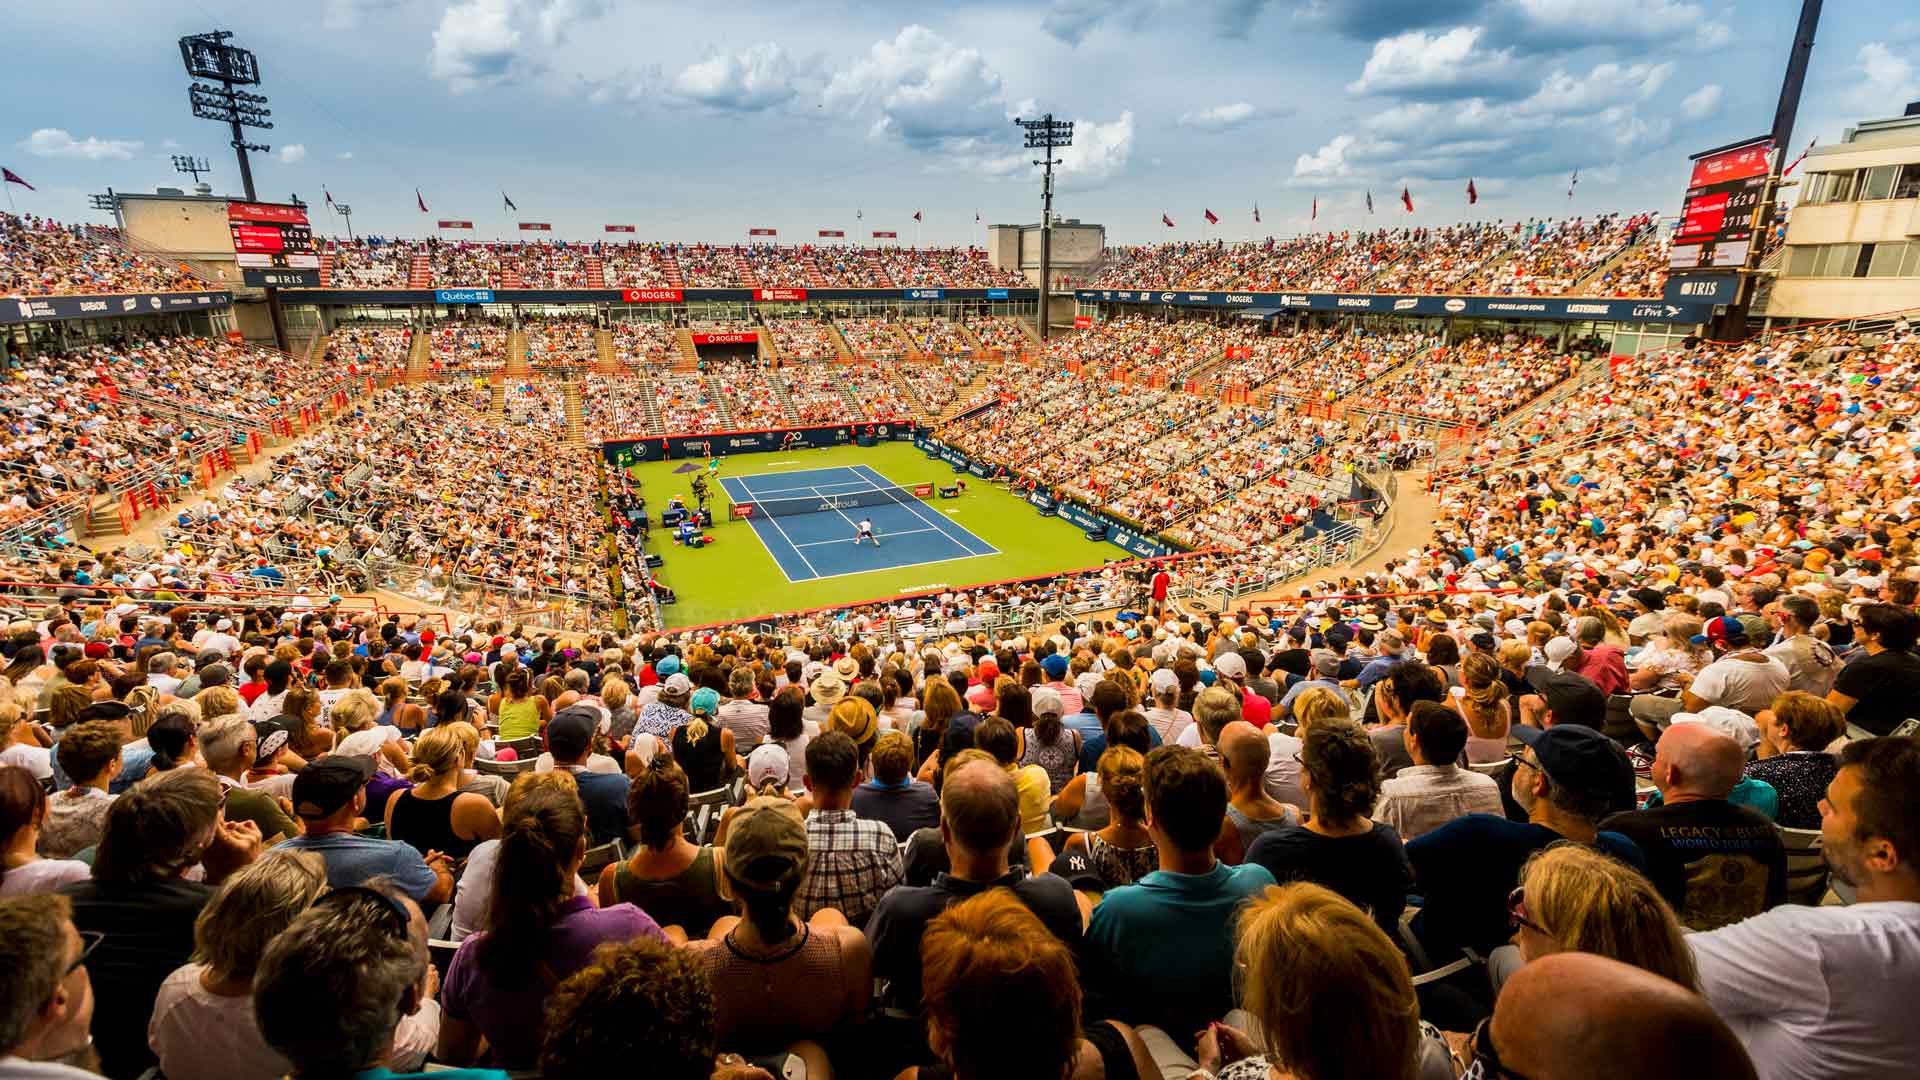 experienced tennis players, schedule and where to watch